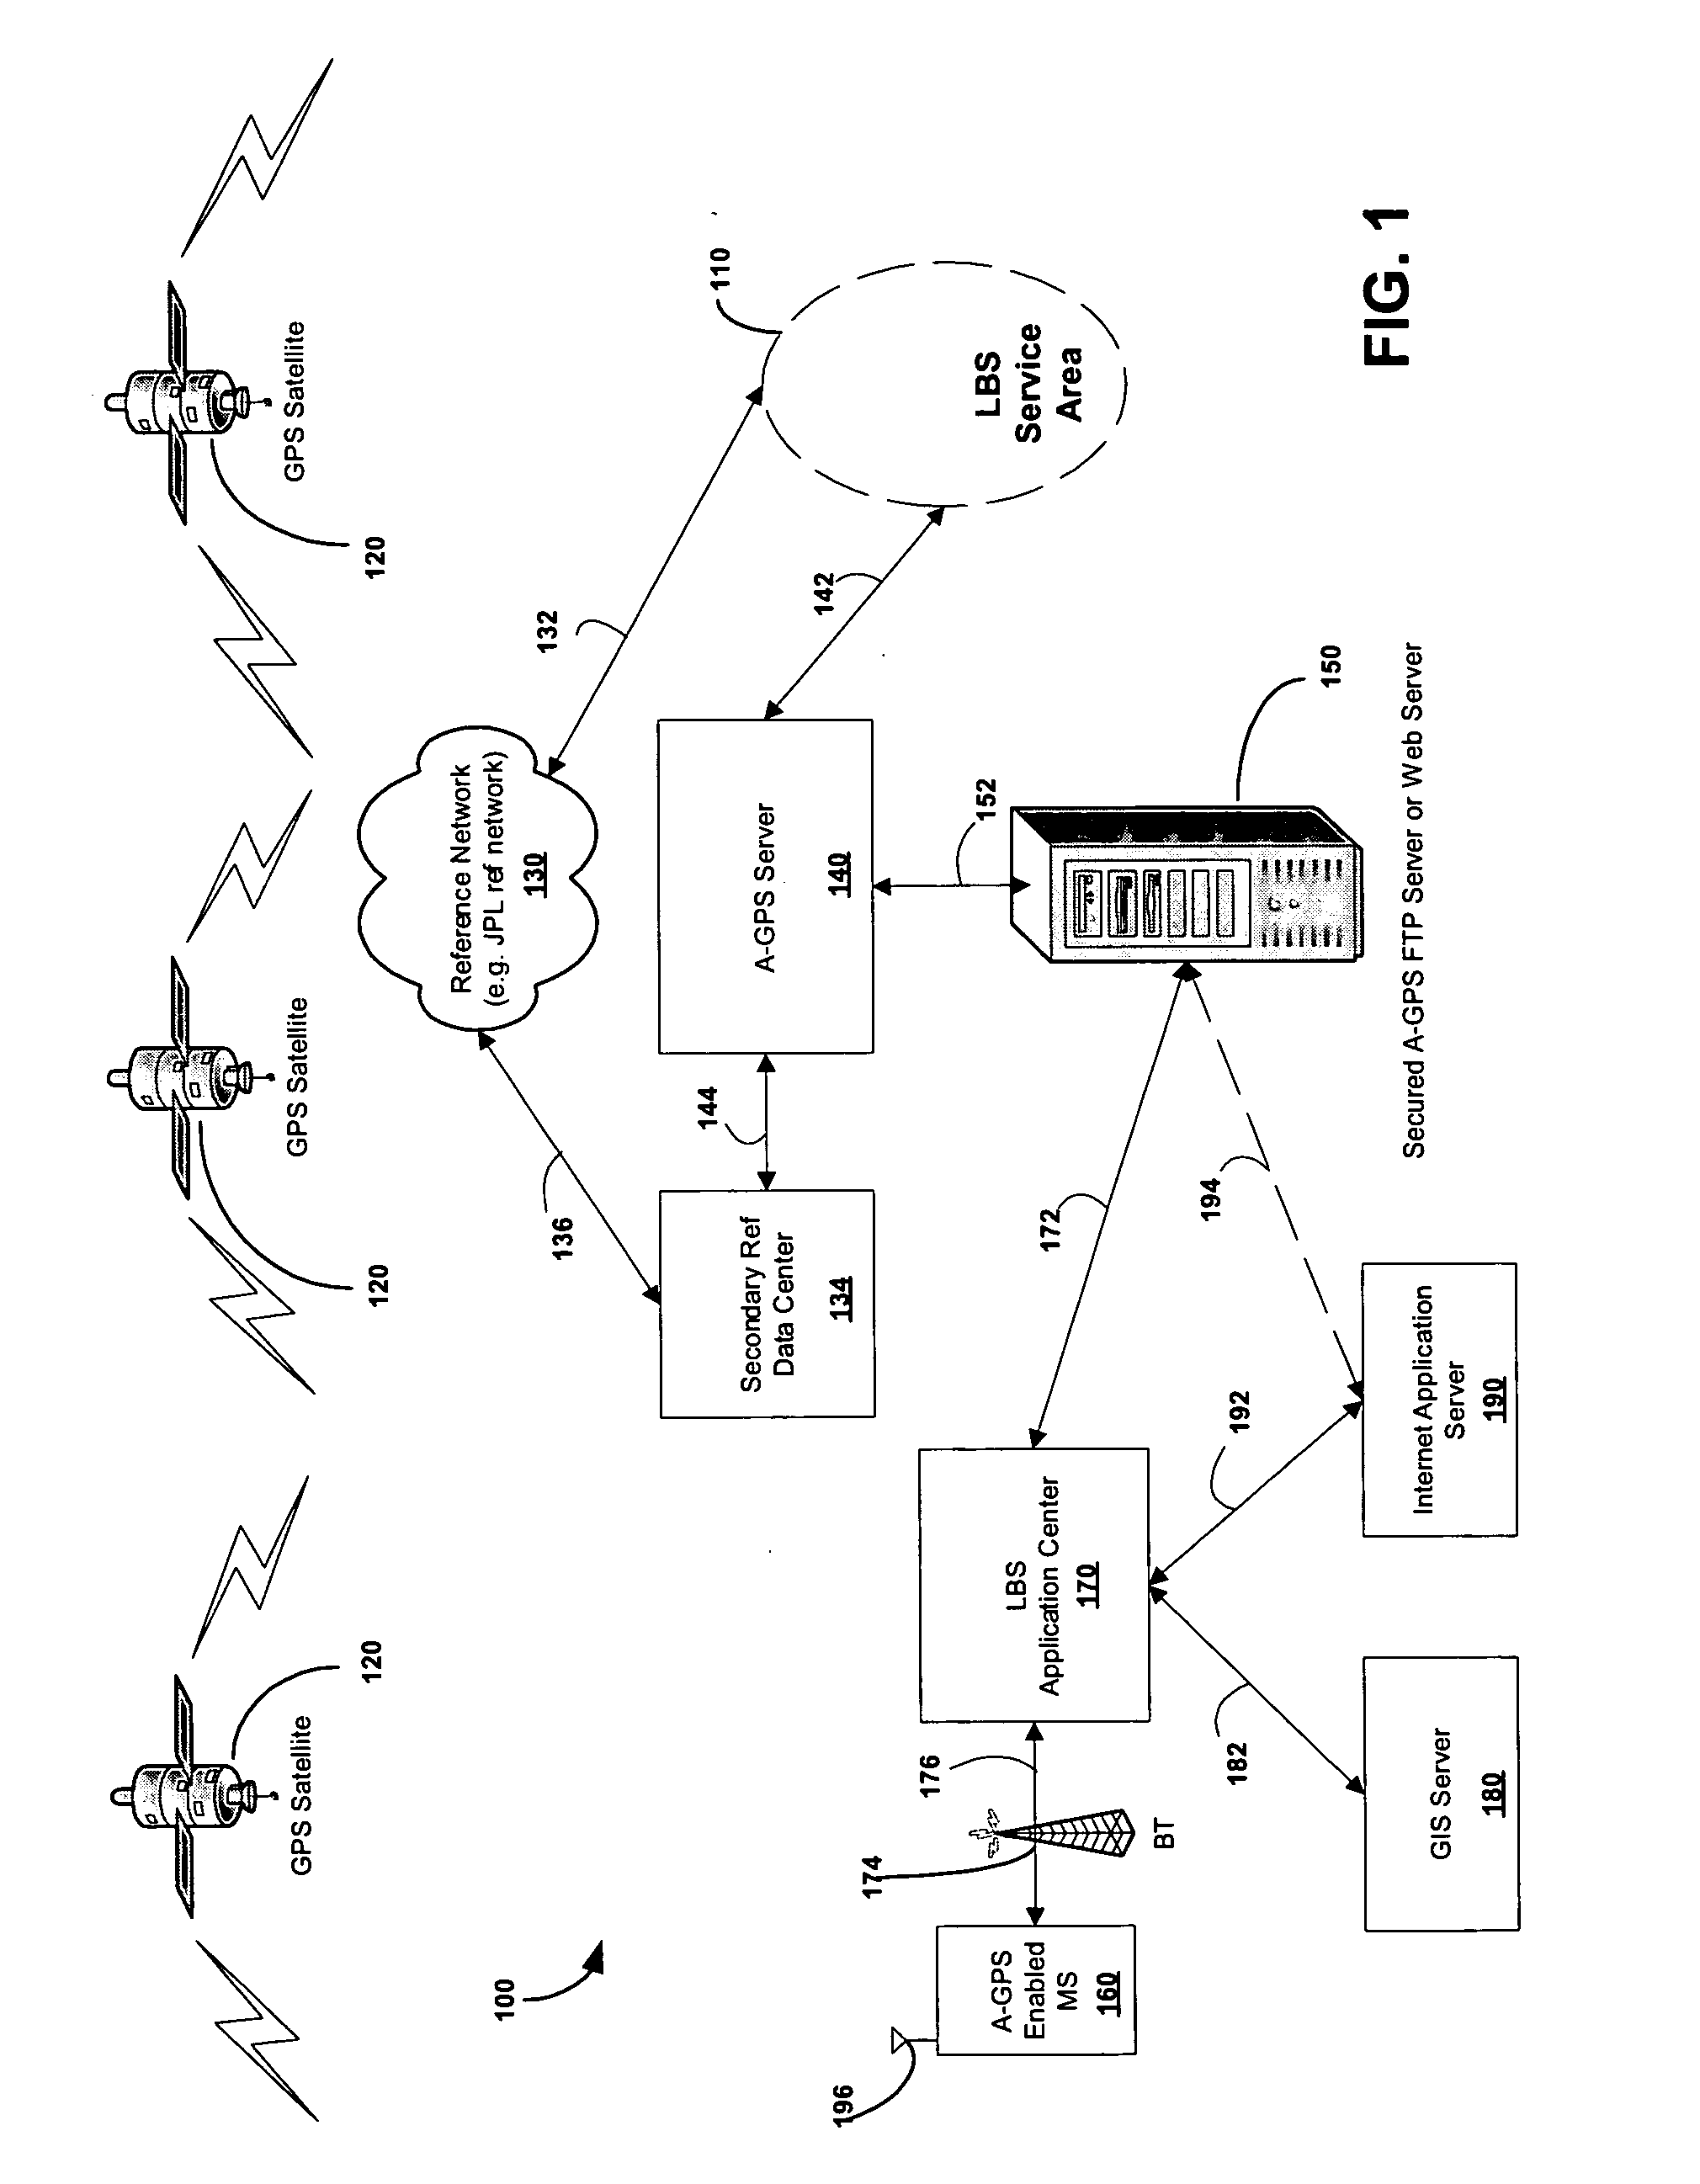 System and method for providing location based services over a network